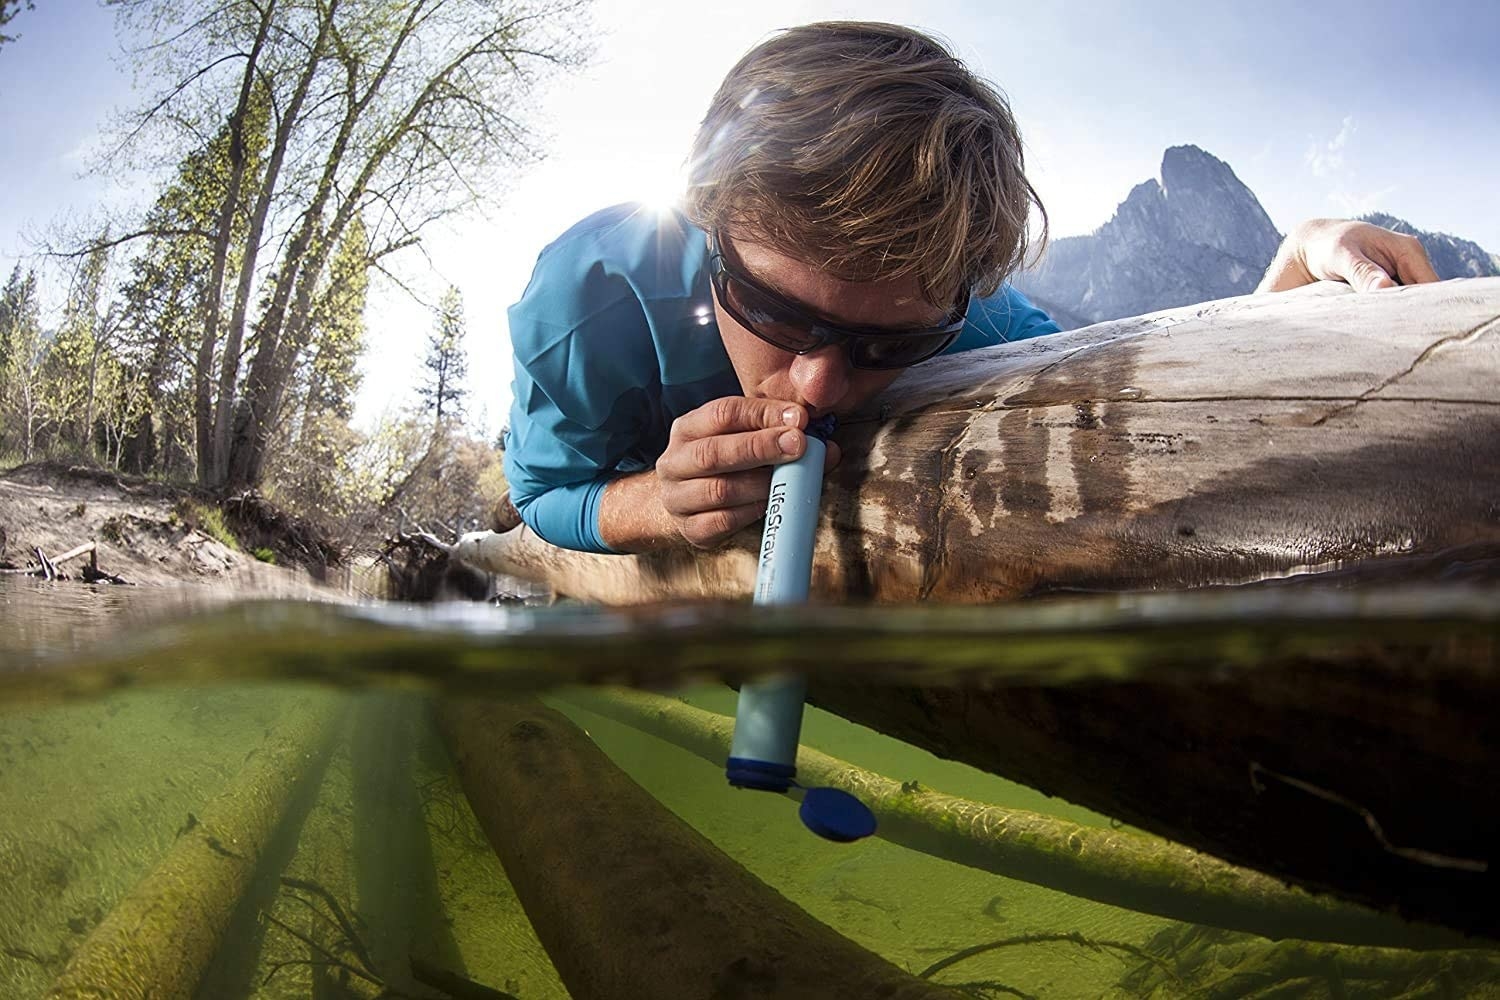 model drinks from blue LifeStraw Personal Water Filter placed in a stream